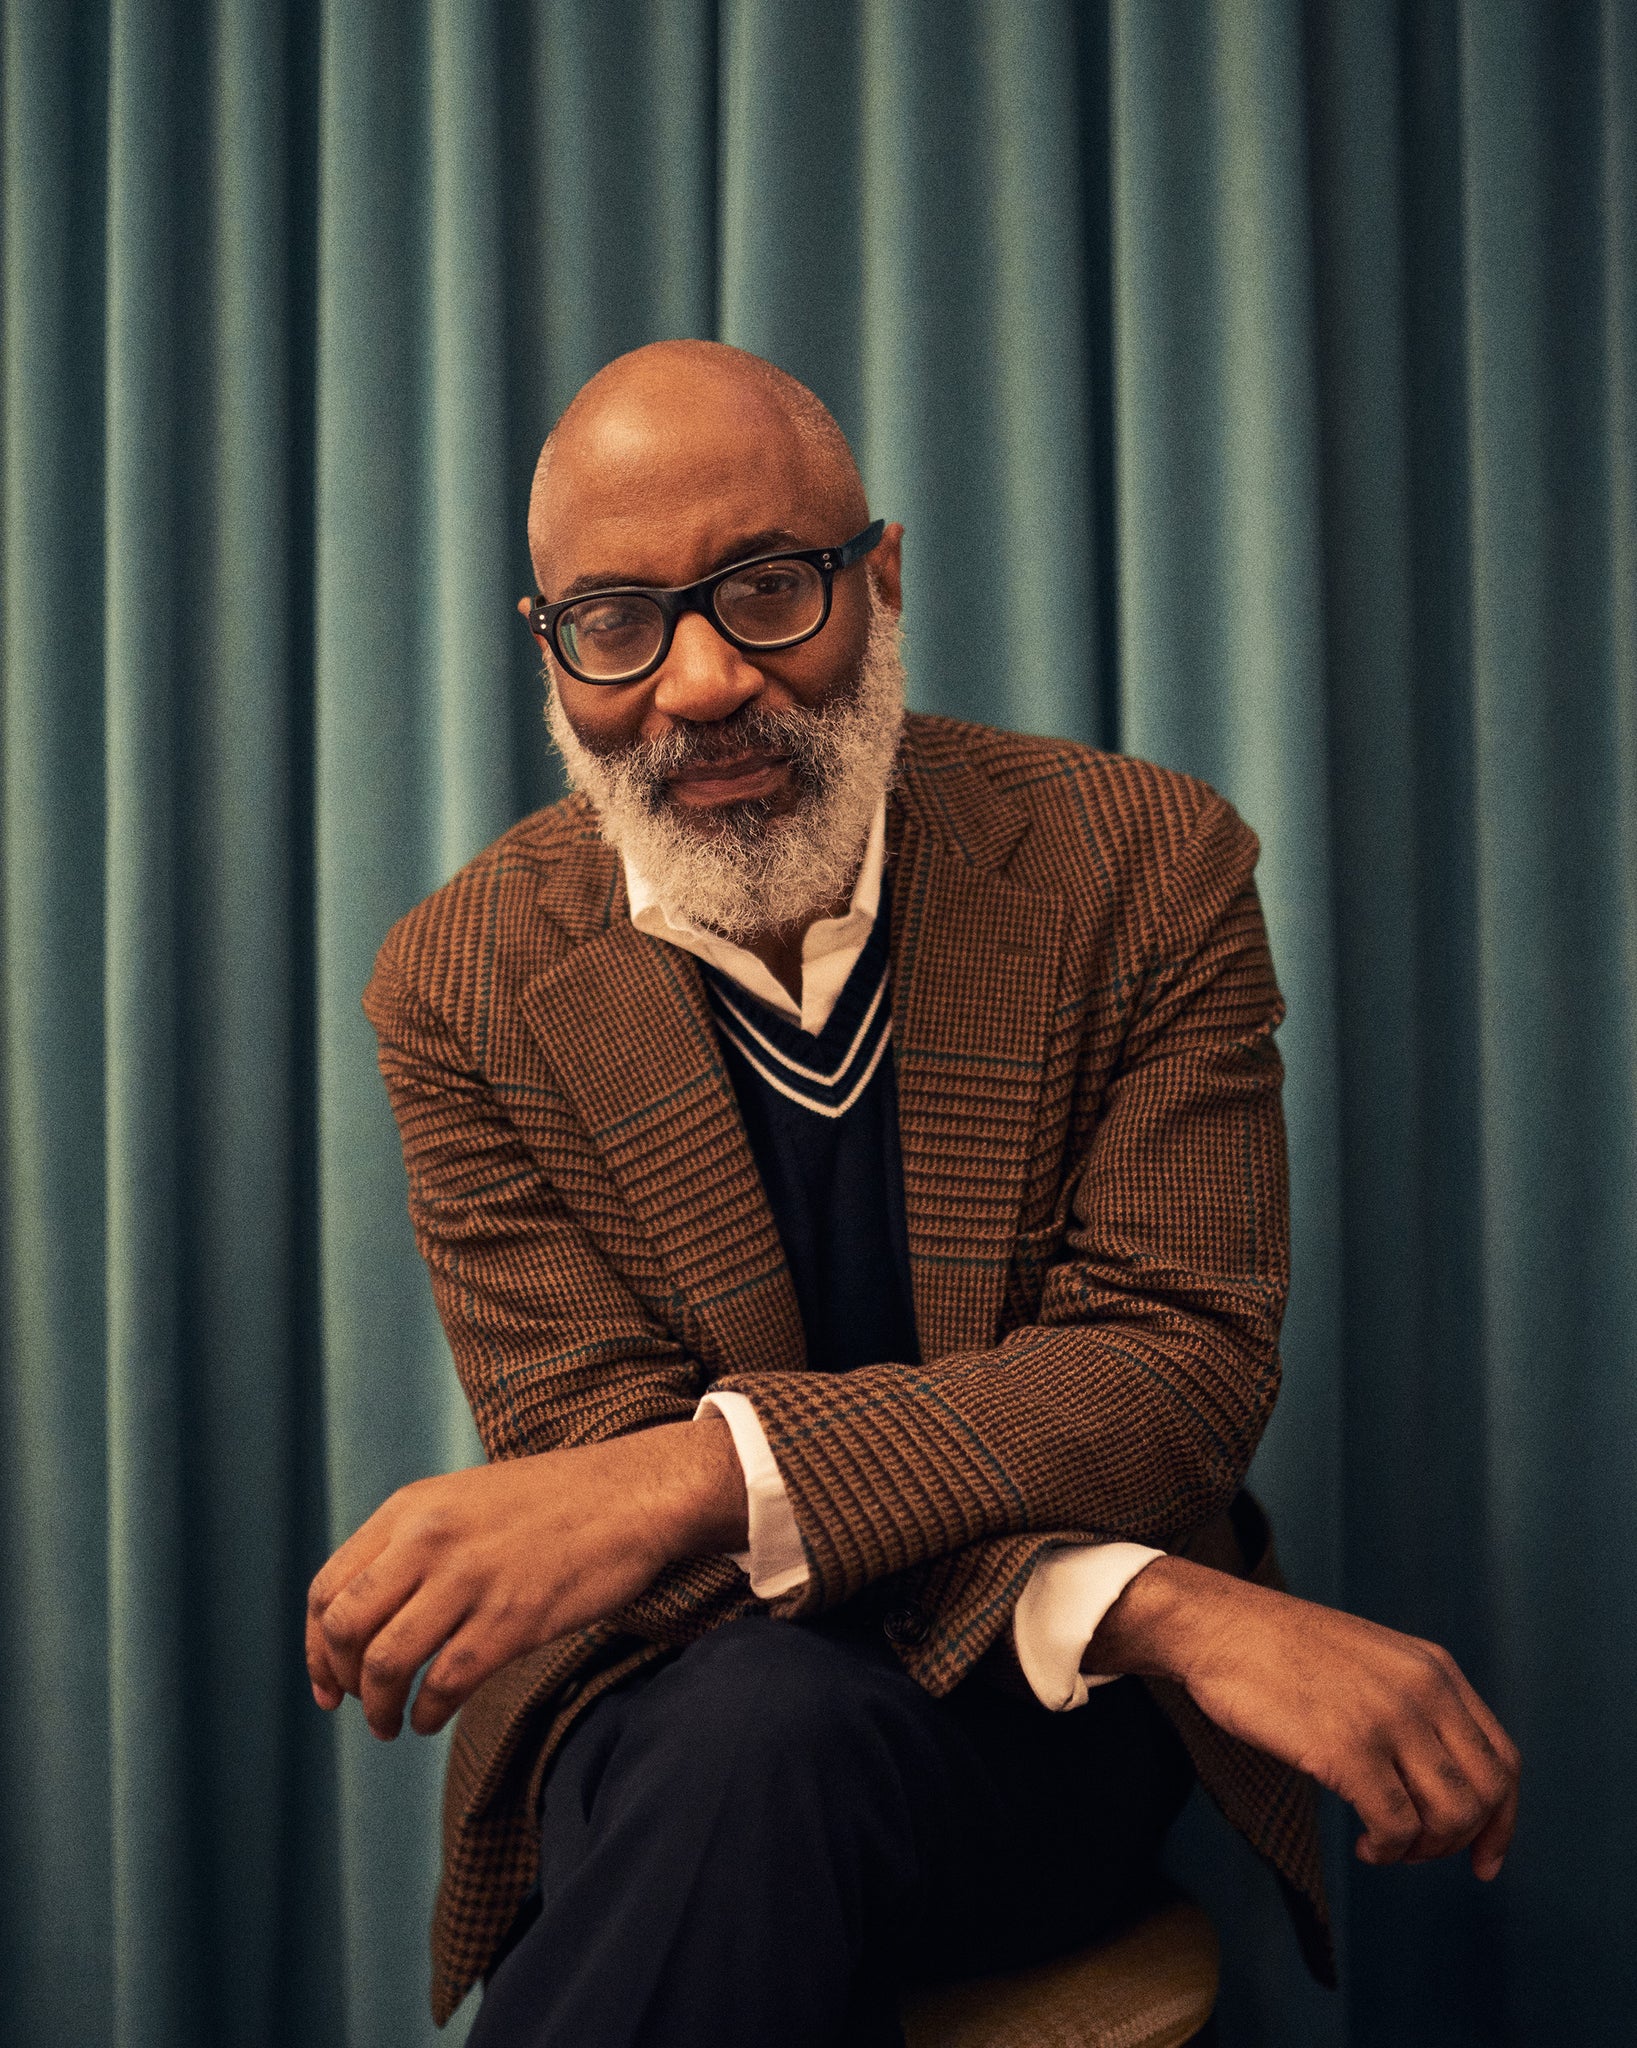 Jason Jules in a brown suit and white collared shirt against the background of a blue curtain, speaking about Ivy Style, African American fashion, jazz, photography, and more. Read the interview now at A Collected Man London.